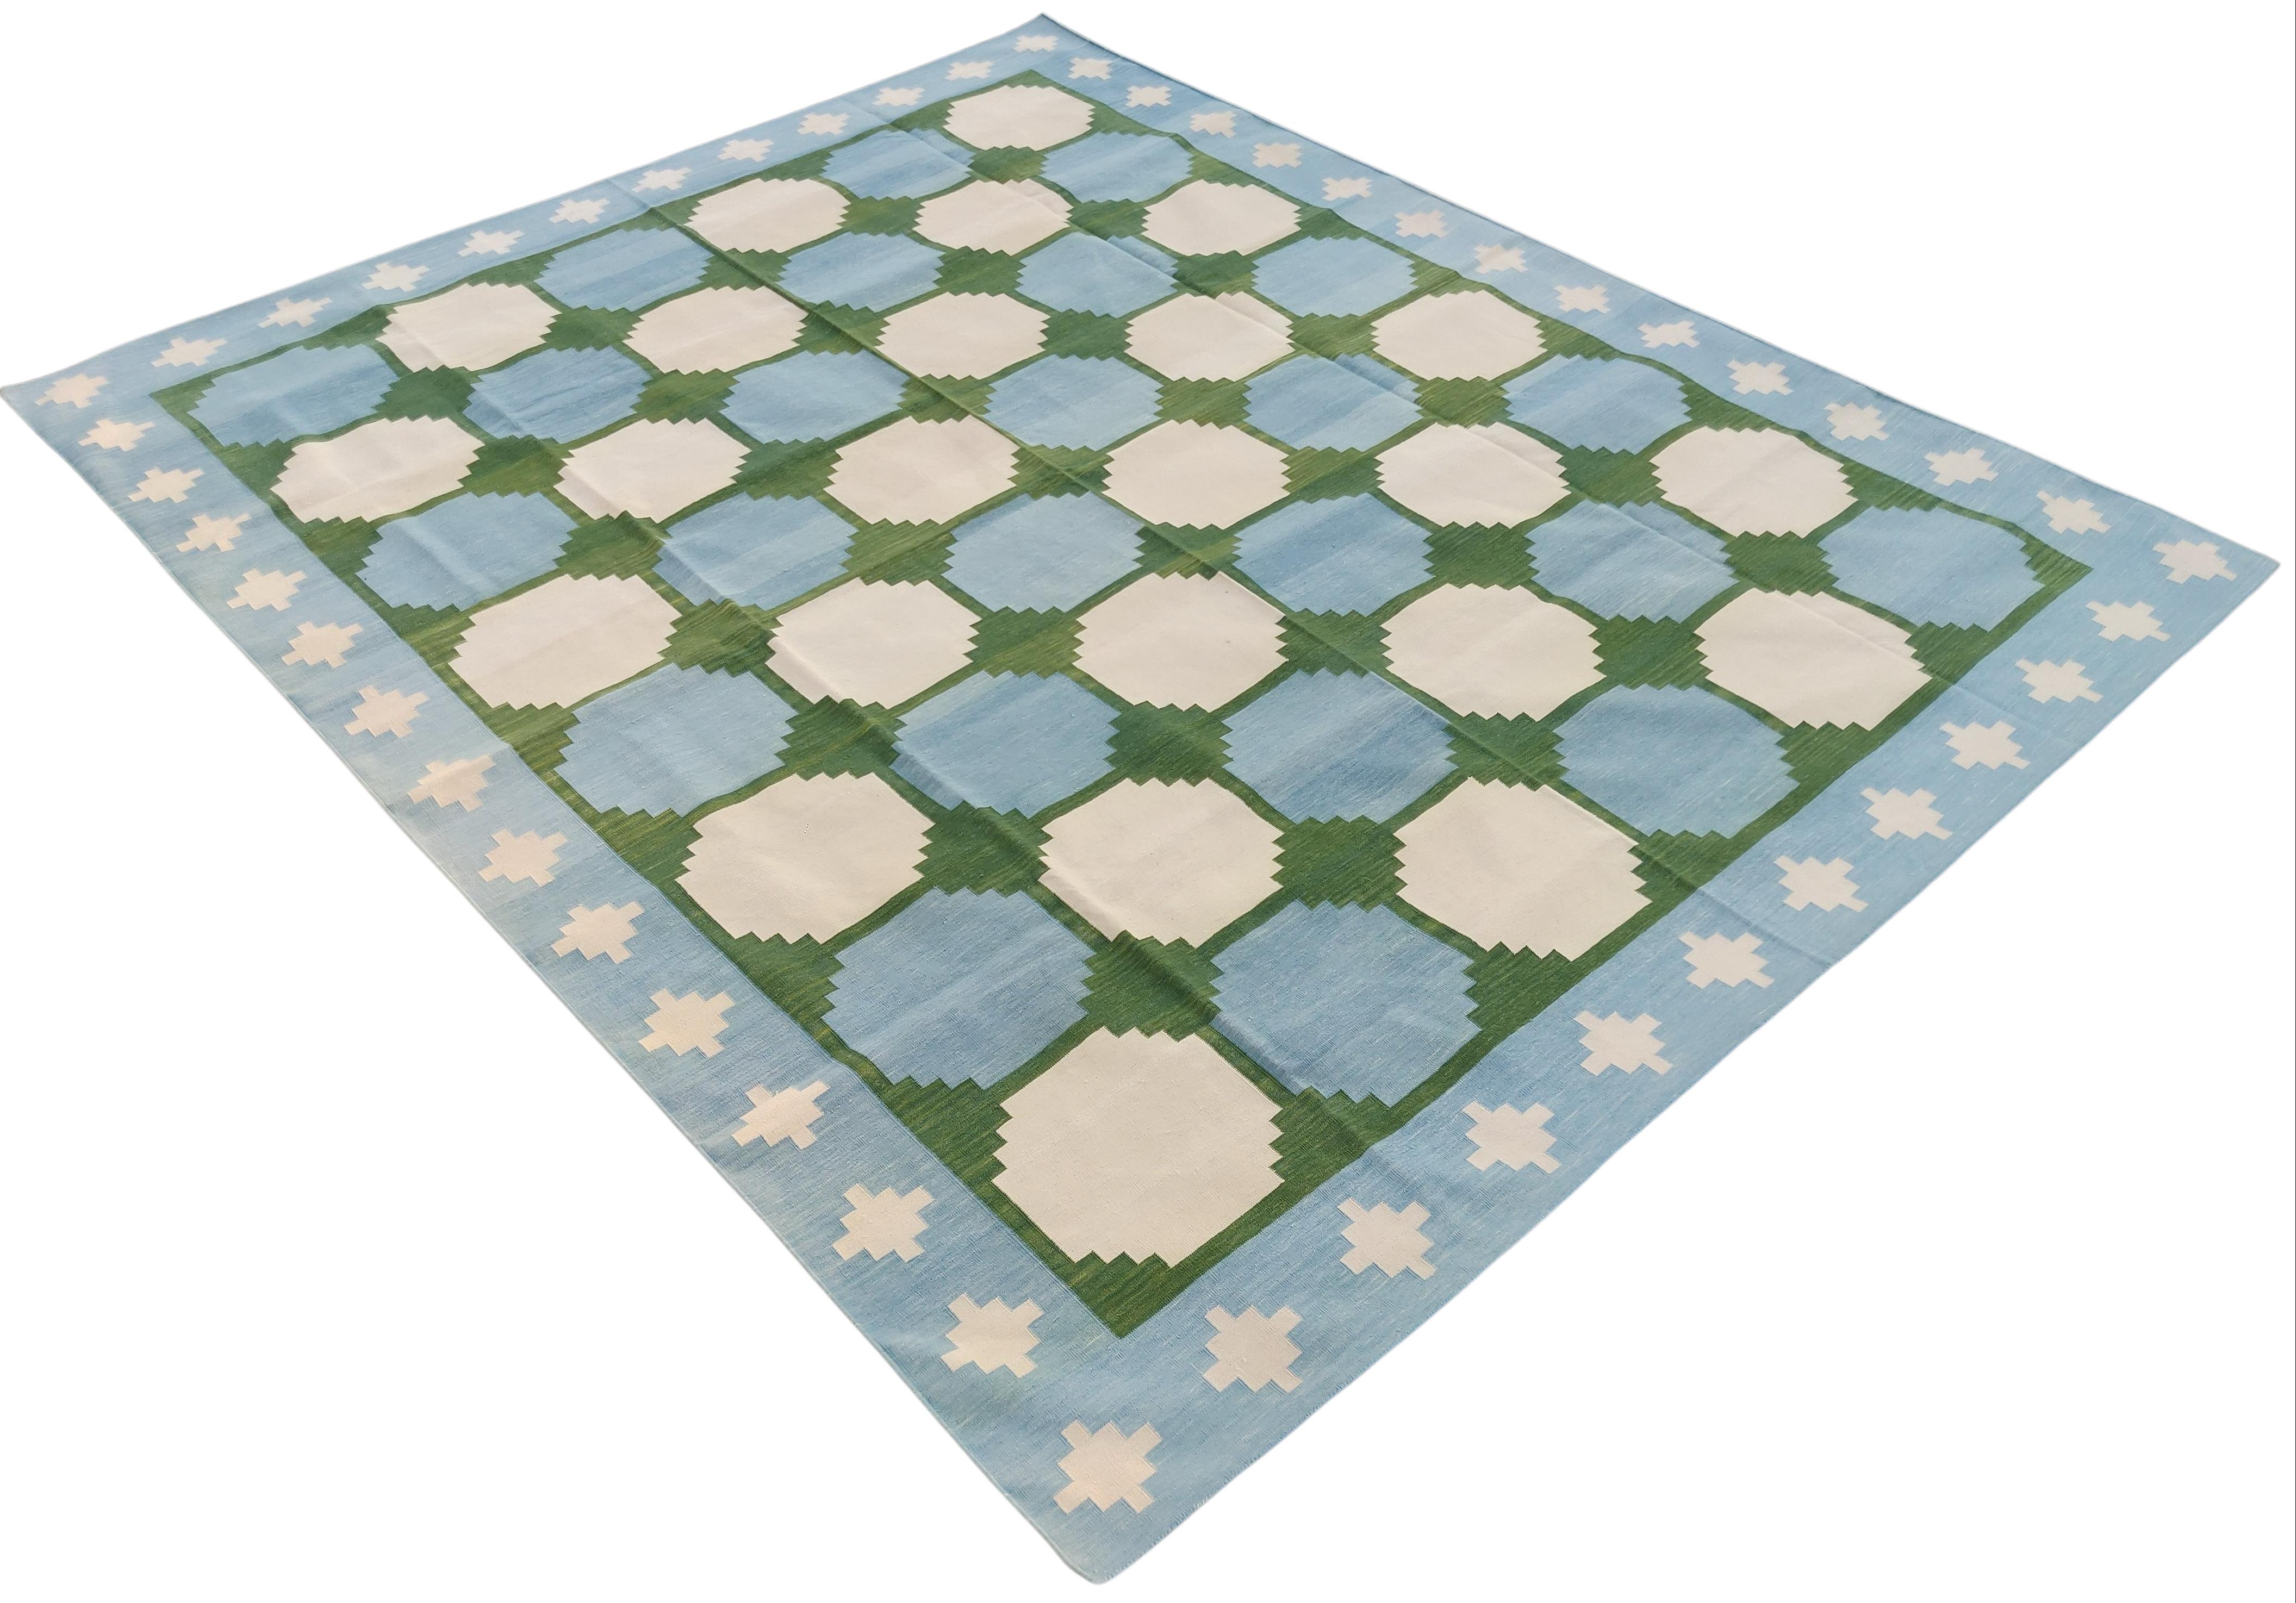 Cotton Natural Vegetable Dyed Forest Green , Sky Blue And Cream Tile Patterned Rug-9'x12'
These special flat-weave dhurries are hand-woven with 15 ply 100% cotton yarn. Due to the special manufacturing techniques used to create our rugs, the size